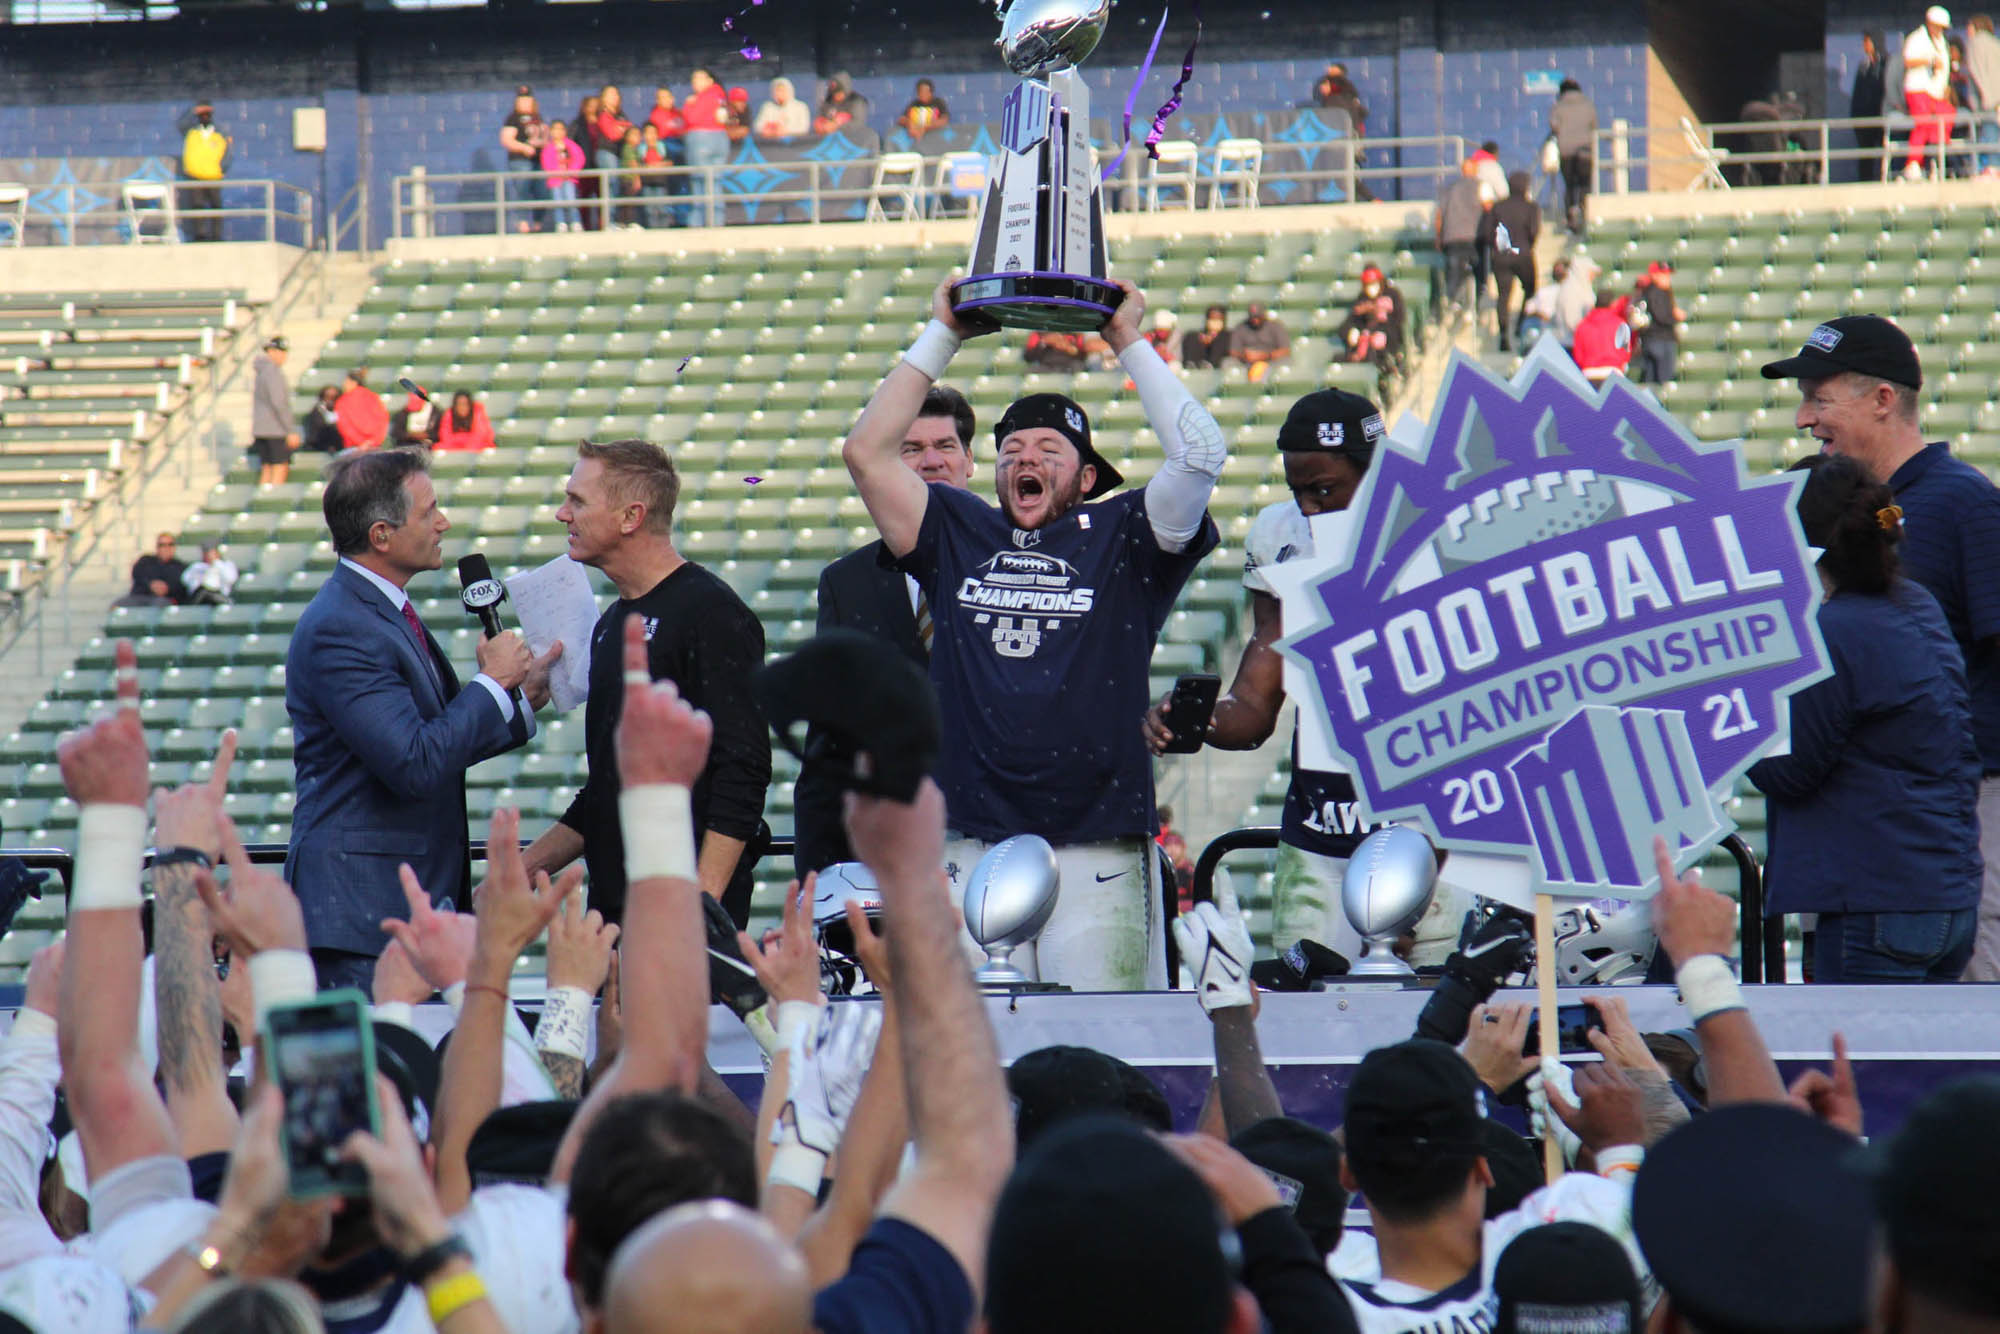 Mountain West changes its football championship game qualifications